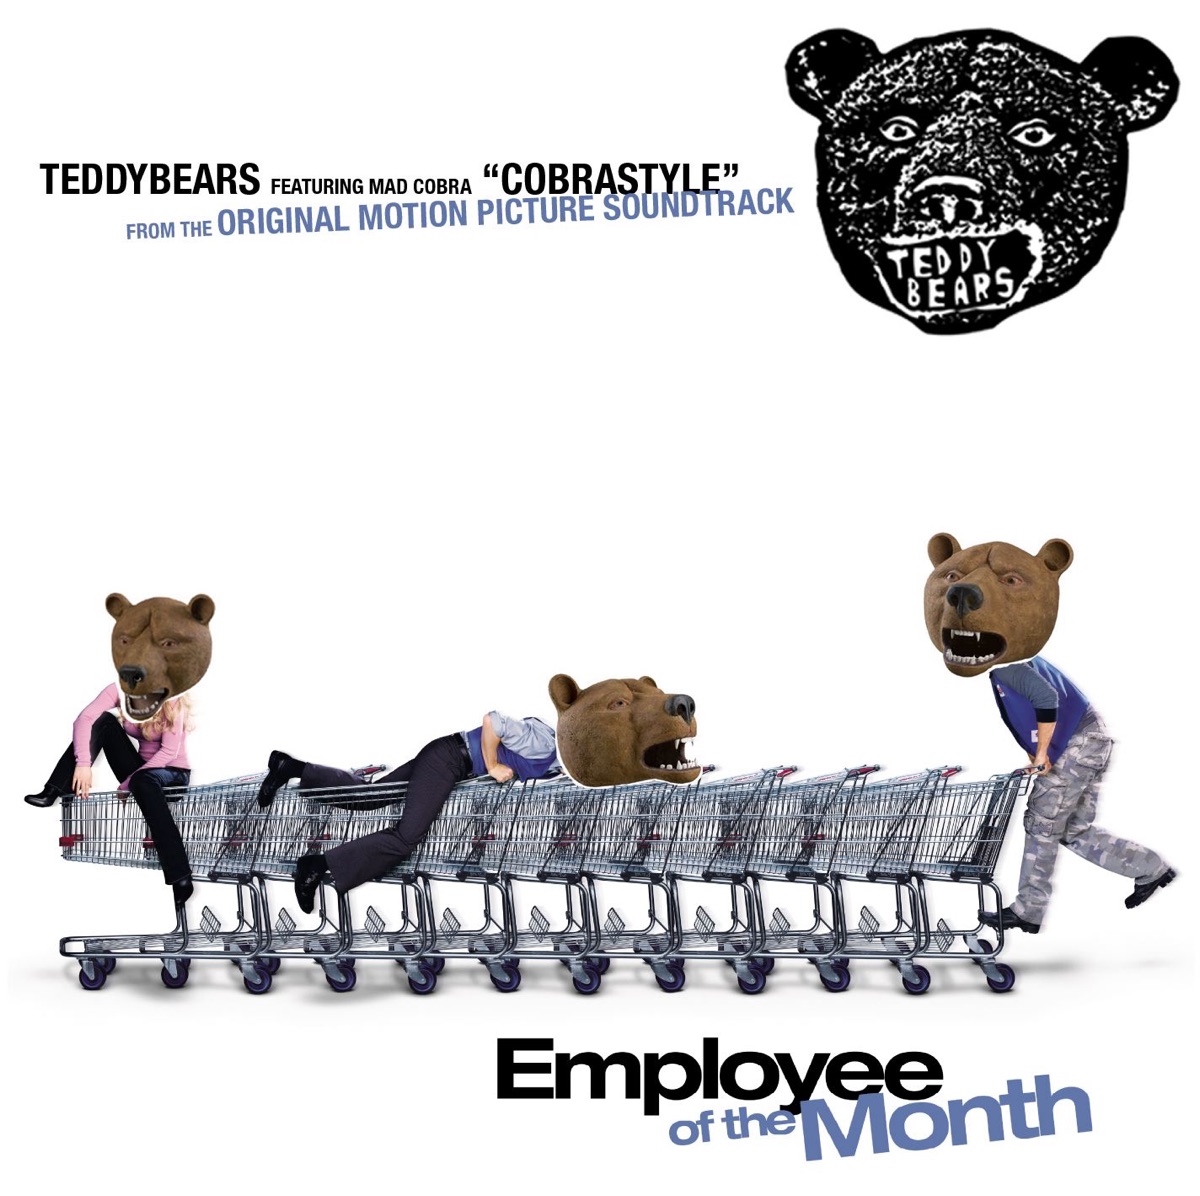 Cobrastyle - From Employee of the Month Soundtrack - Single - Album by Teddybears  featuring Mad Cobra - Apple Music